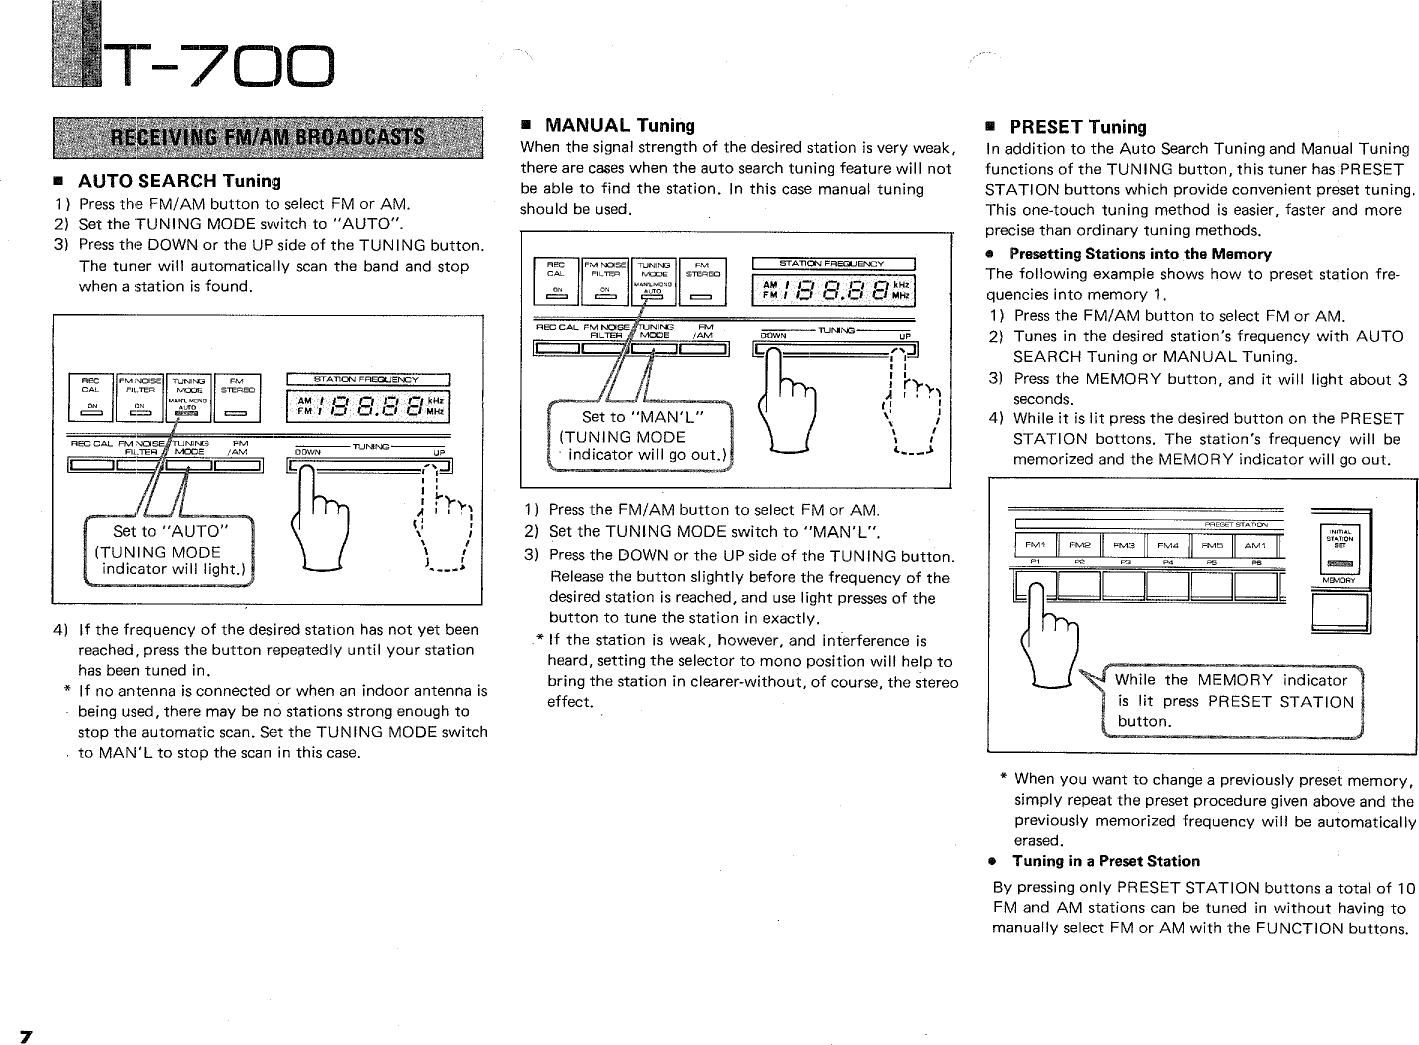 Page 8 of 12 - Yamaha .橡.ページ) T-700 OWNER'S MANUAL